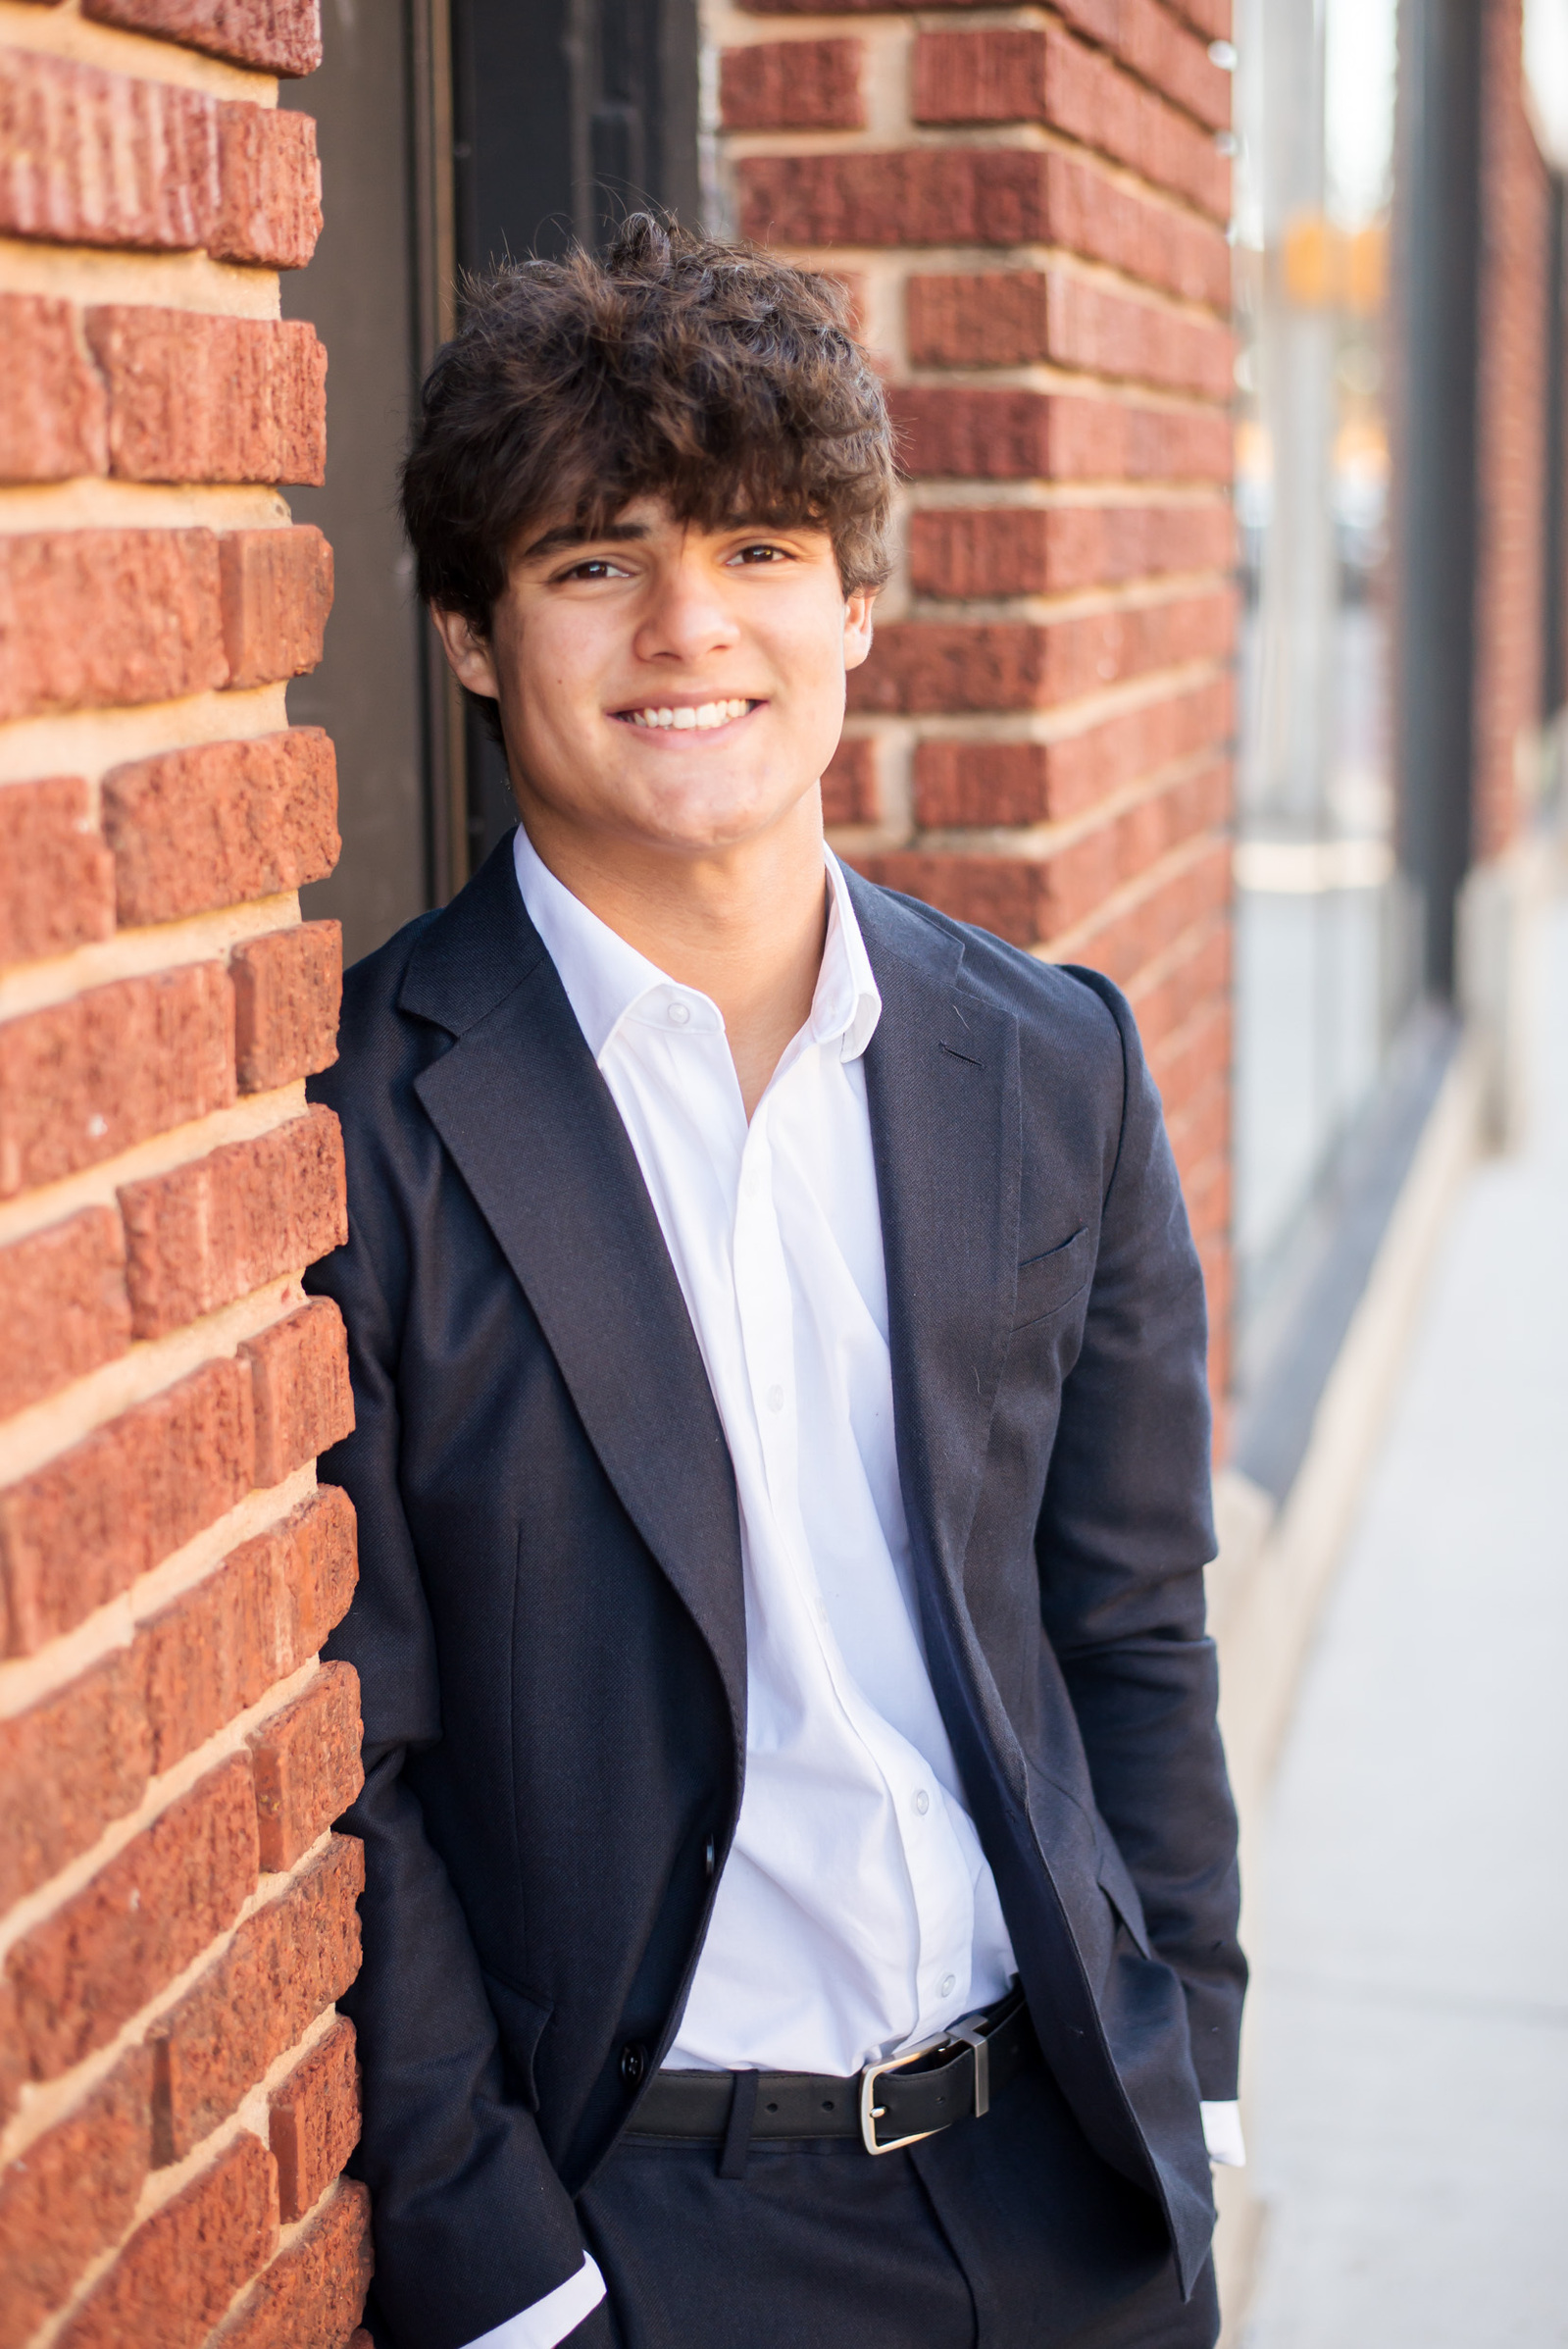 hispanic high school senior boy wearing a dark suit with white shirt leans against a red brick wall with hands in pockets and smiling in midtown Oklahoma City